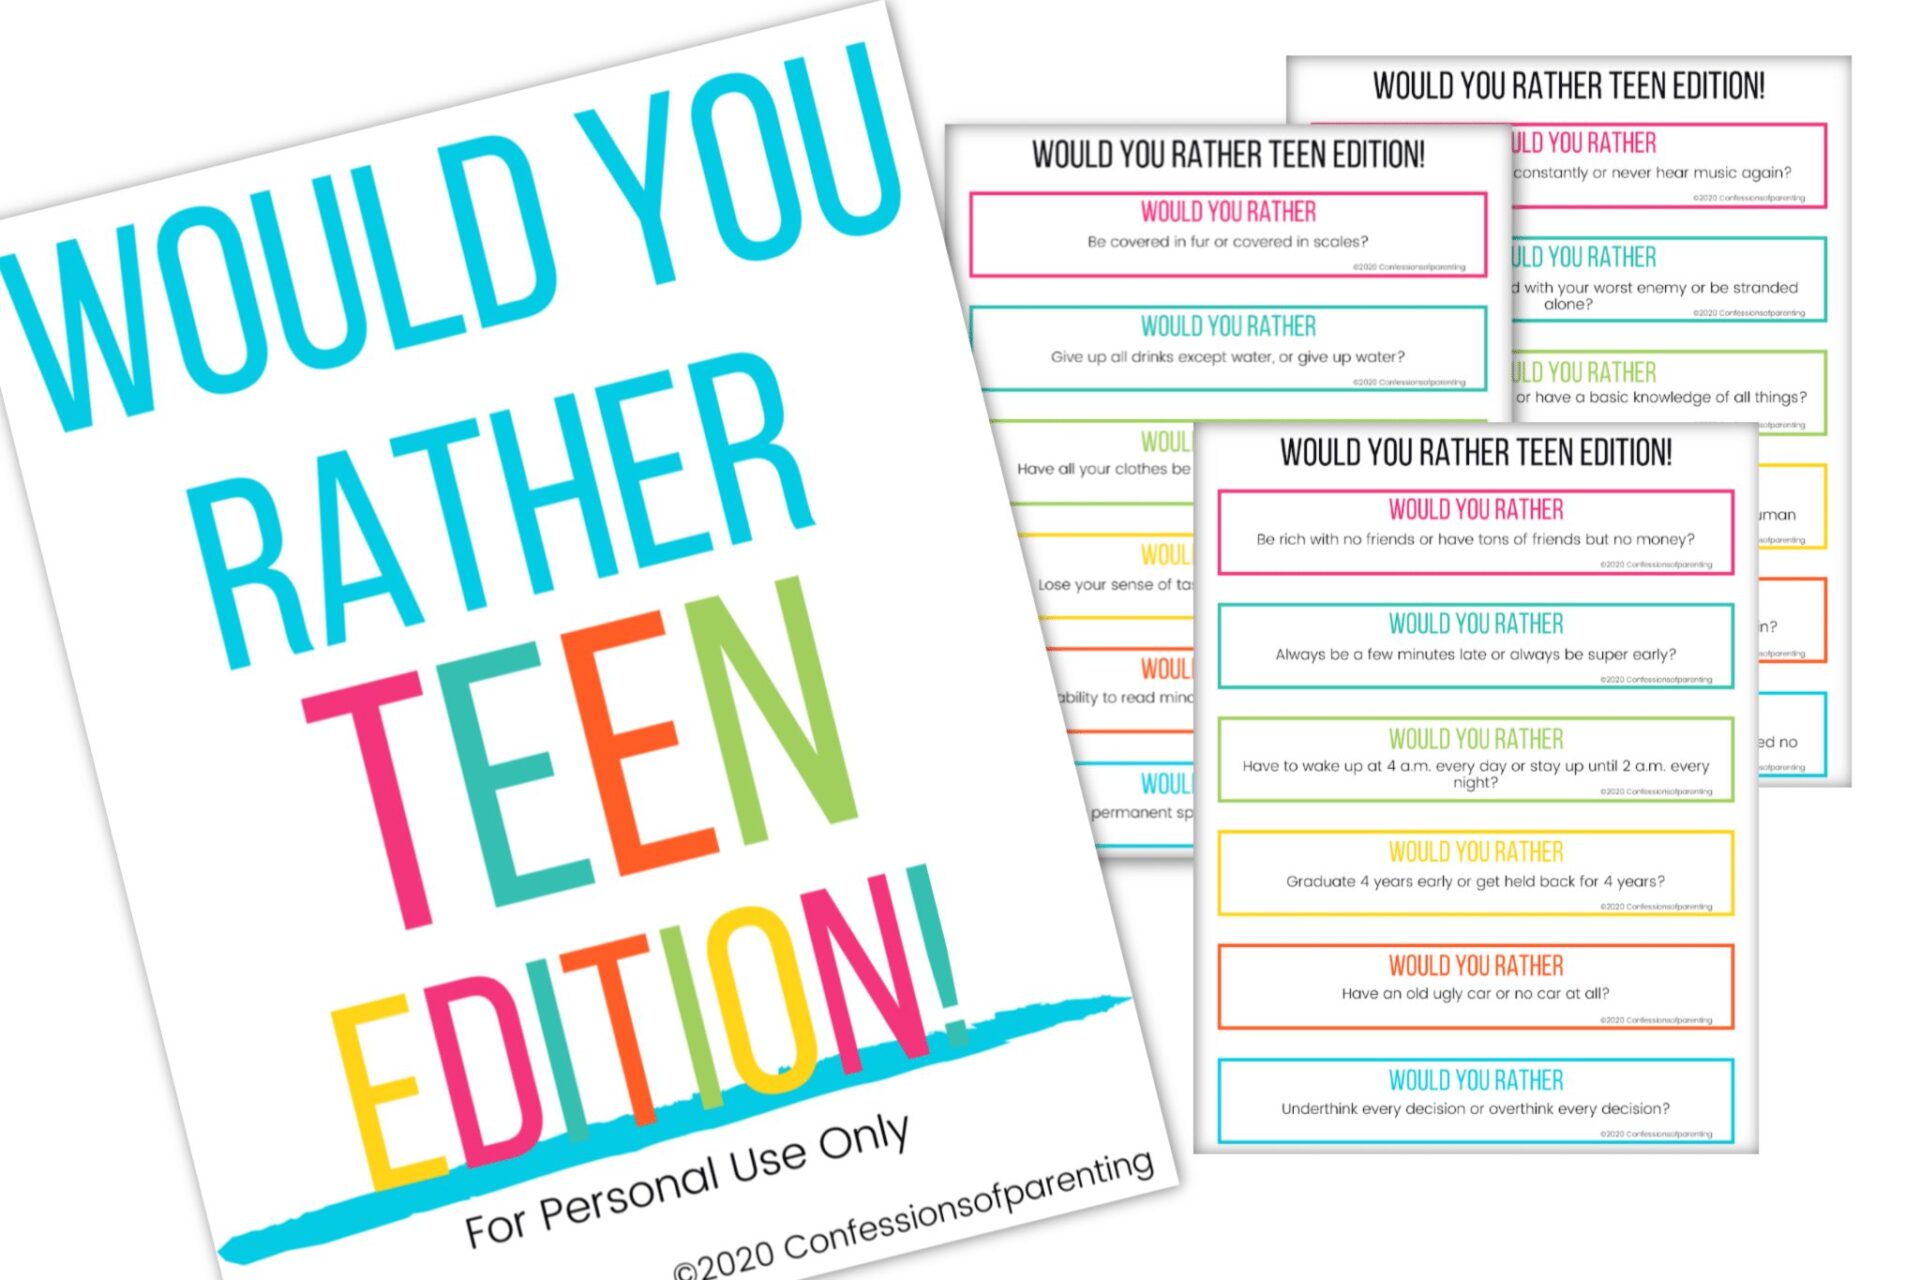 250 Would You Rather Questions for Teens